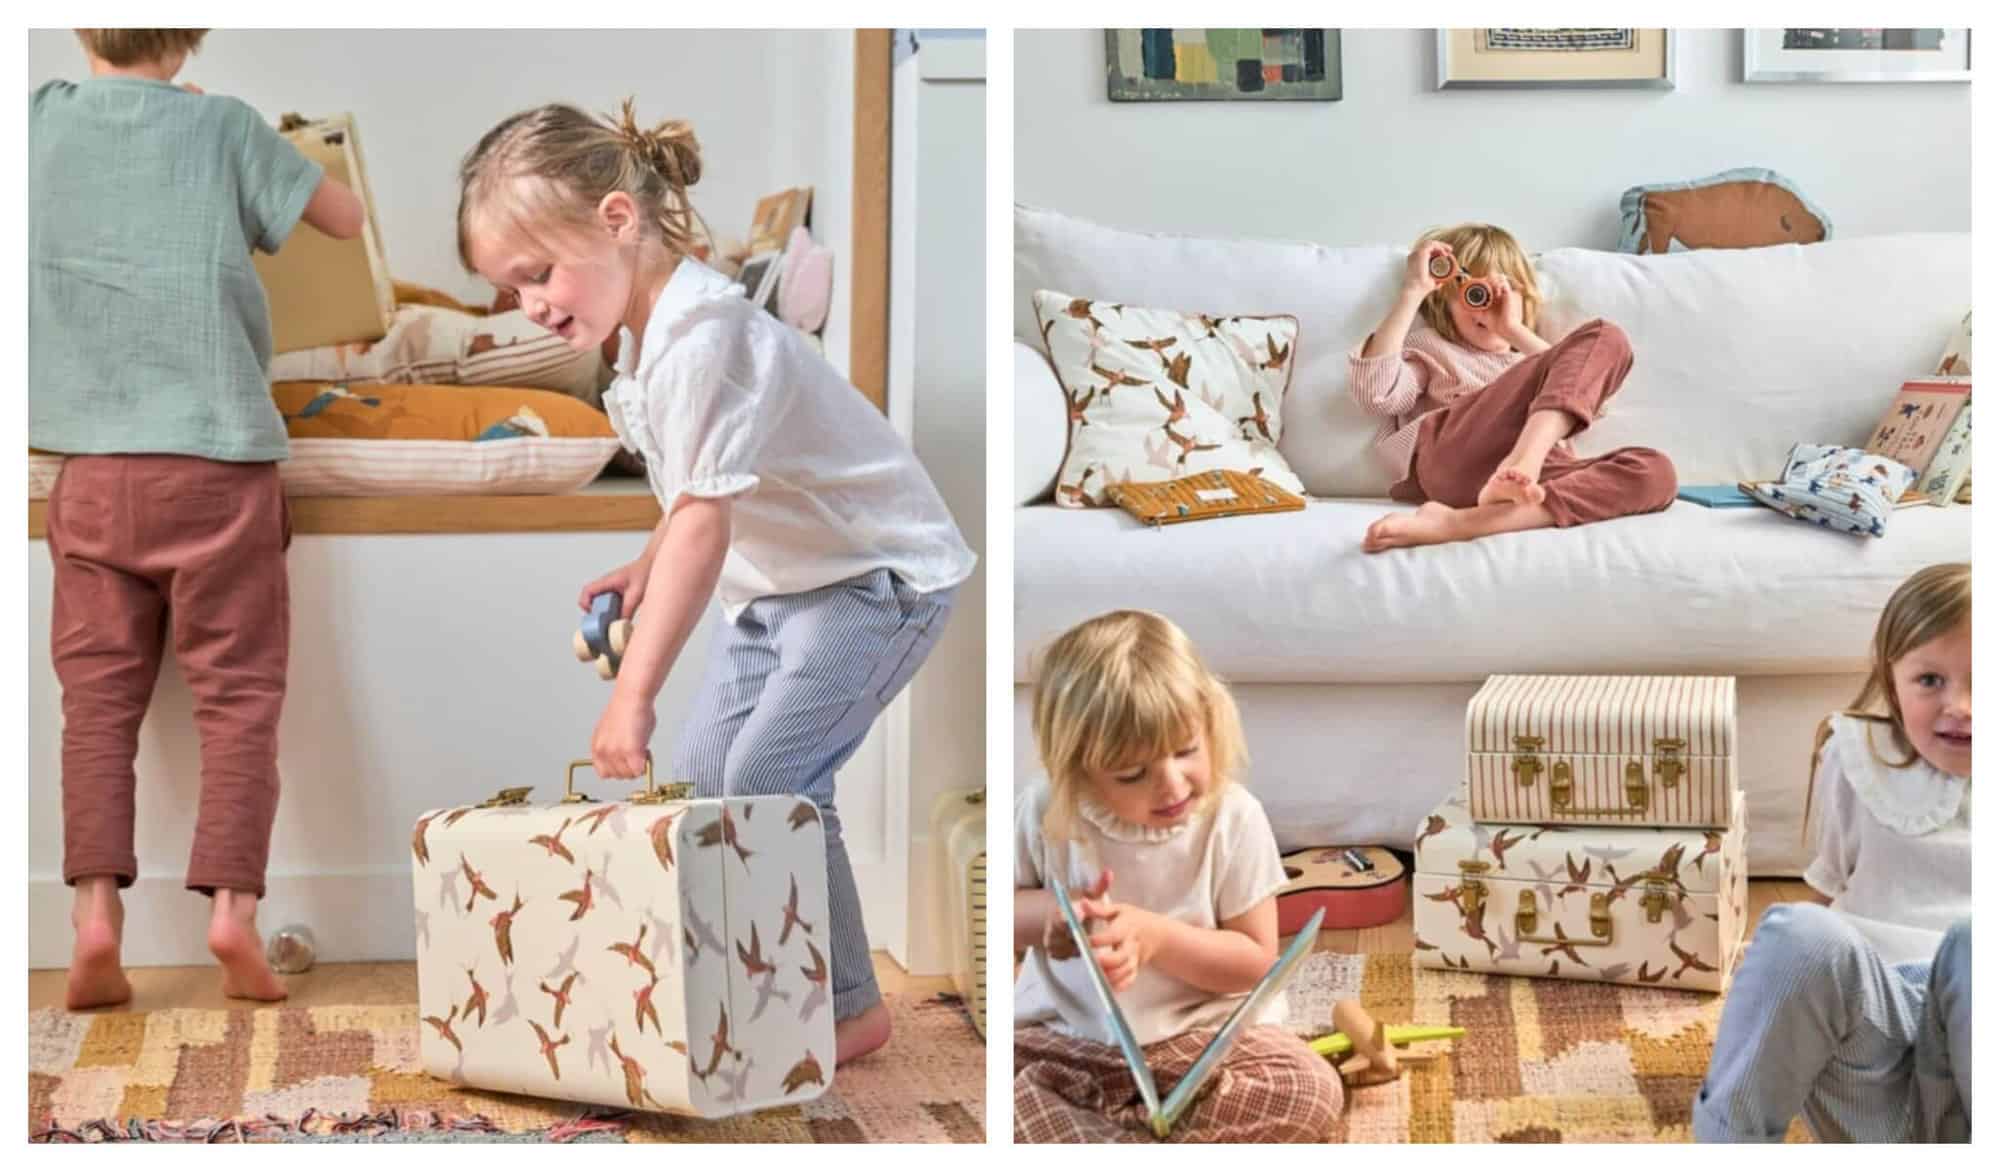 Left: A girl picks up a suitcase that is printed with birds on it while a boy with his back to the camera stands on his toes. Right: Three children are playing together. Two are sitting on the floor and the third is sitting on a white couch looking through a pair of orange binoculars.